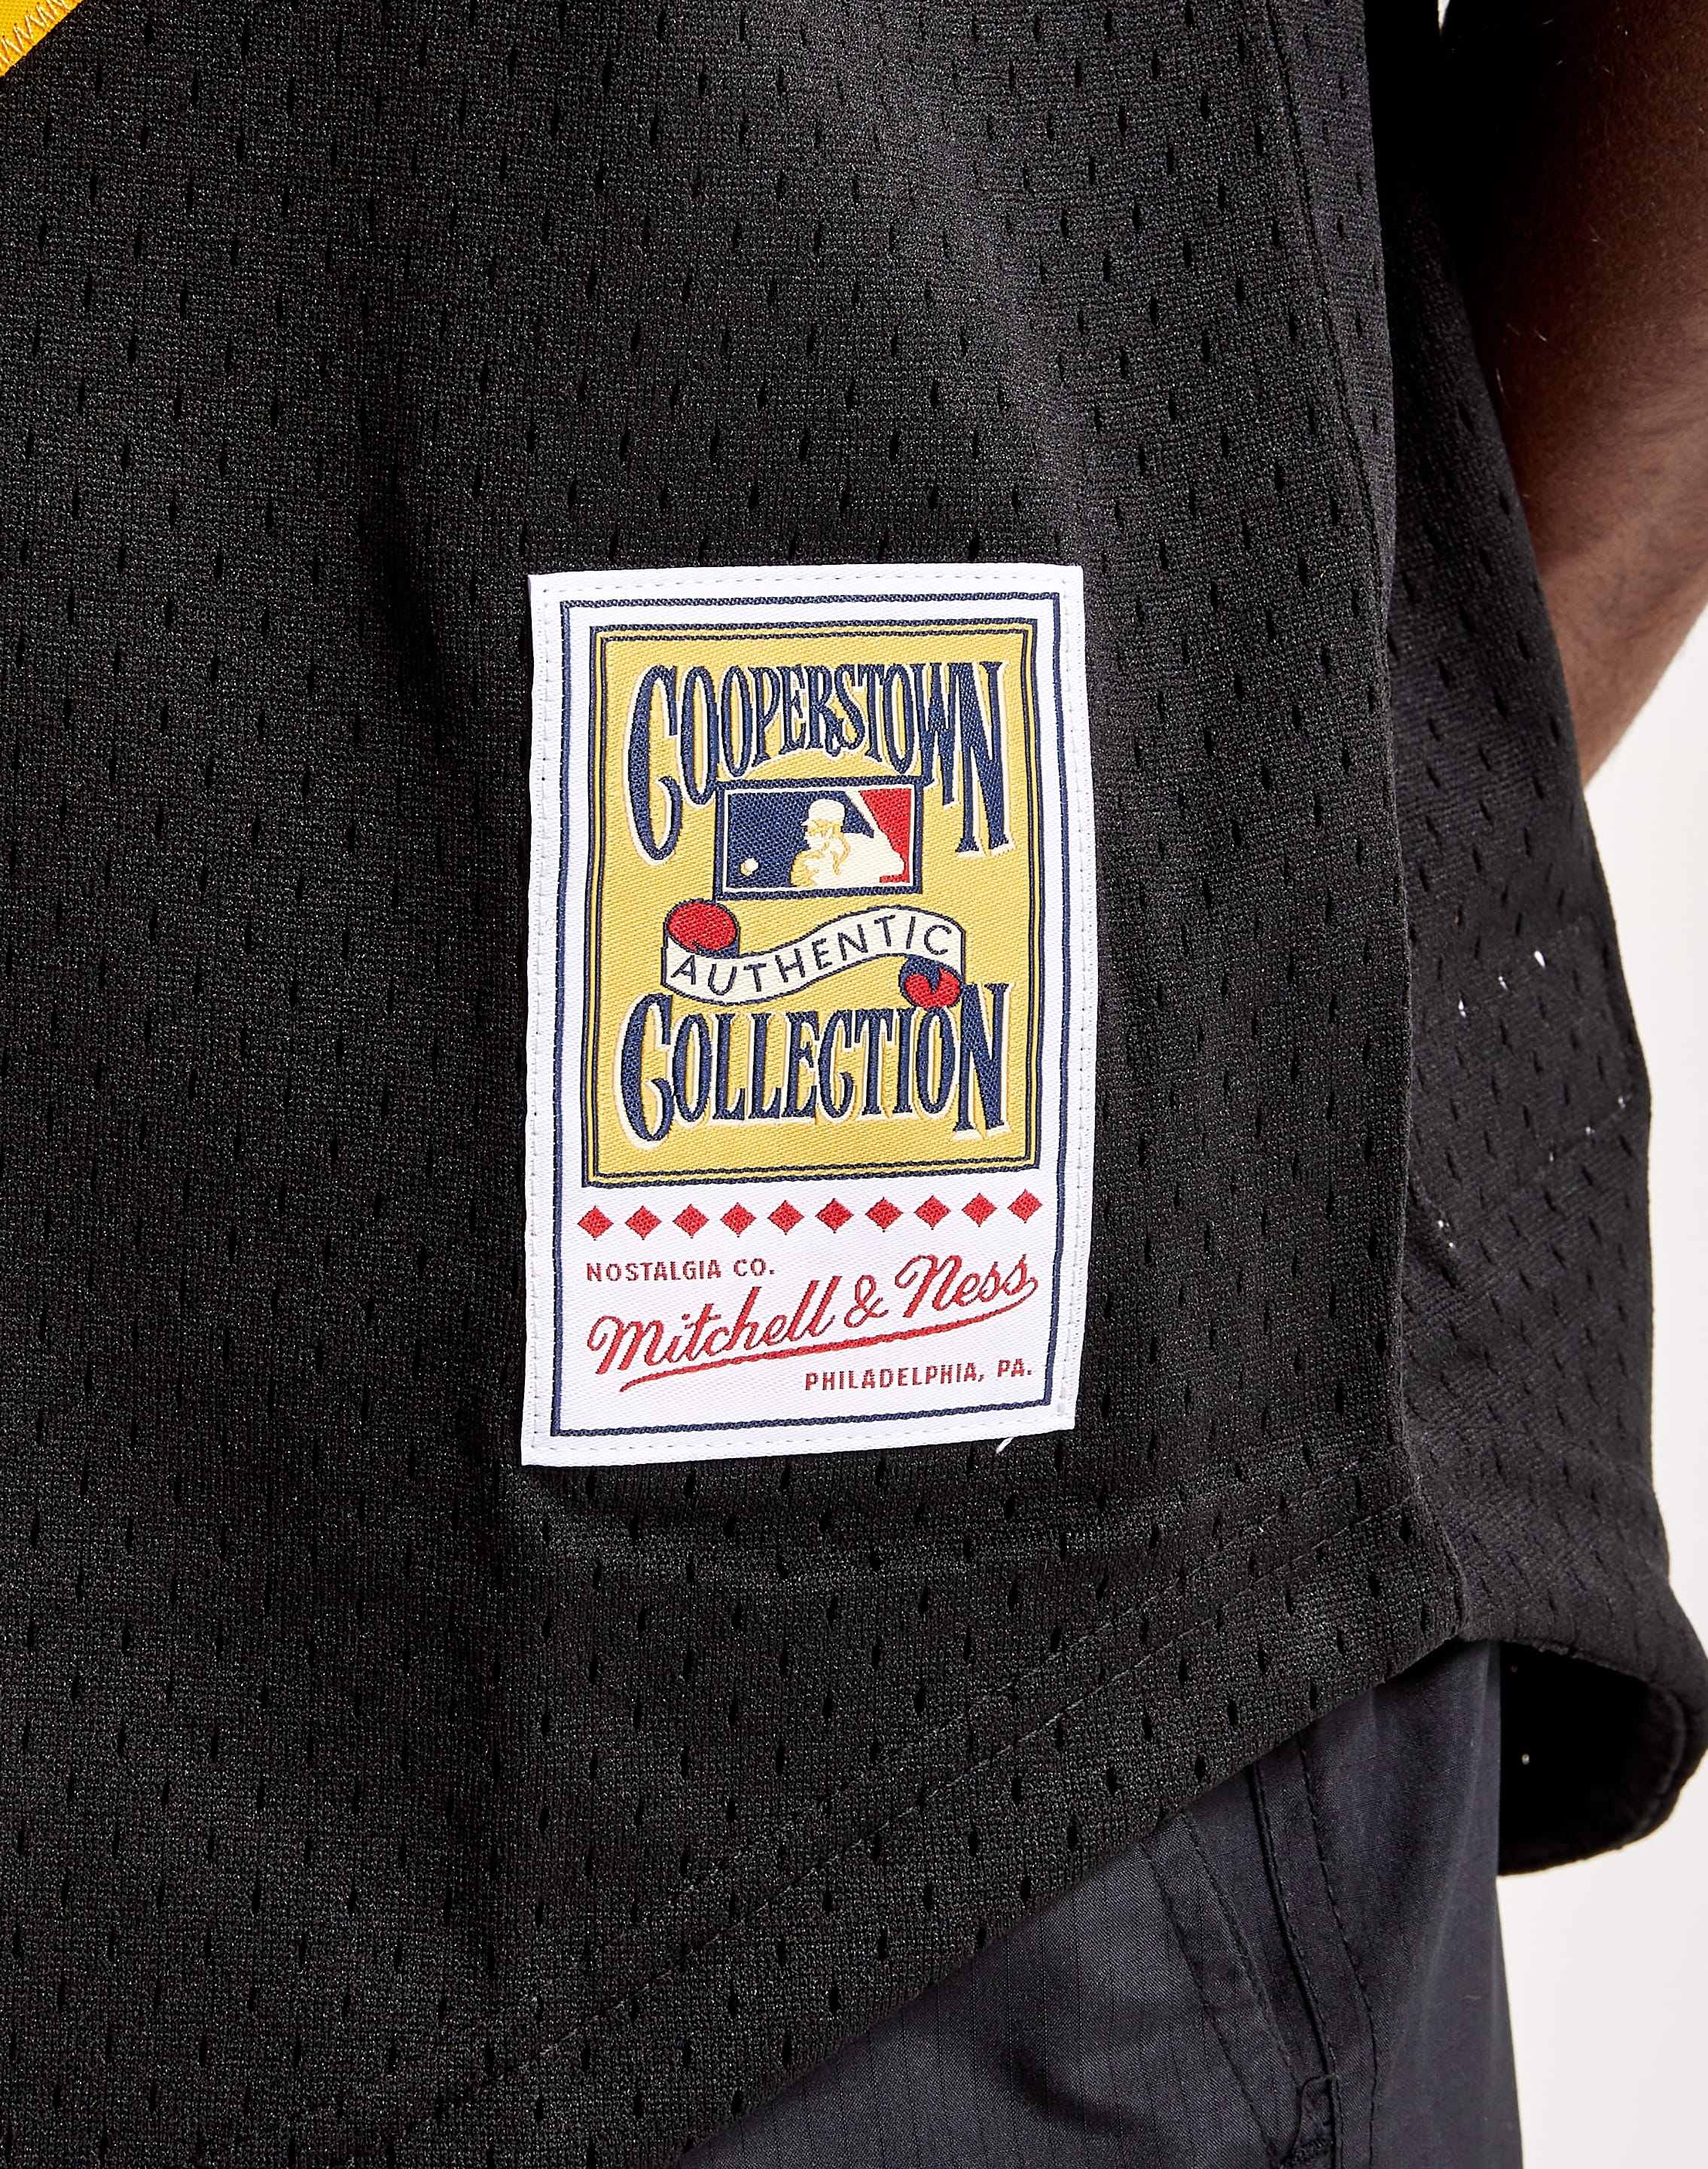 Willie Stargell Pittsburgh Pirates Mitchell & Ness Youth Cooperstown  Collection Mesh Batting Practice Jersey - Black